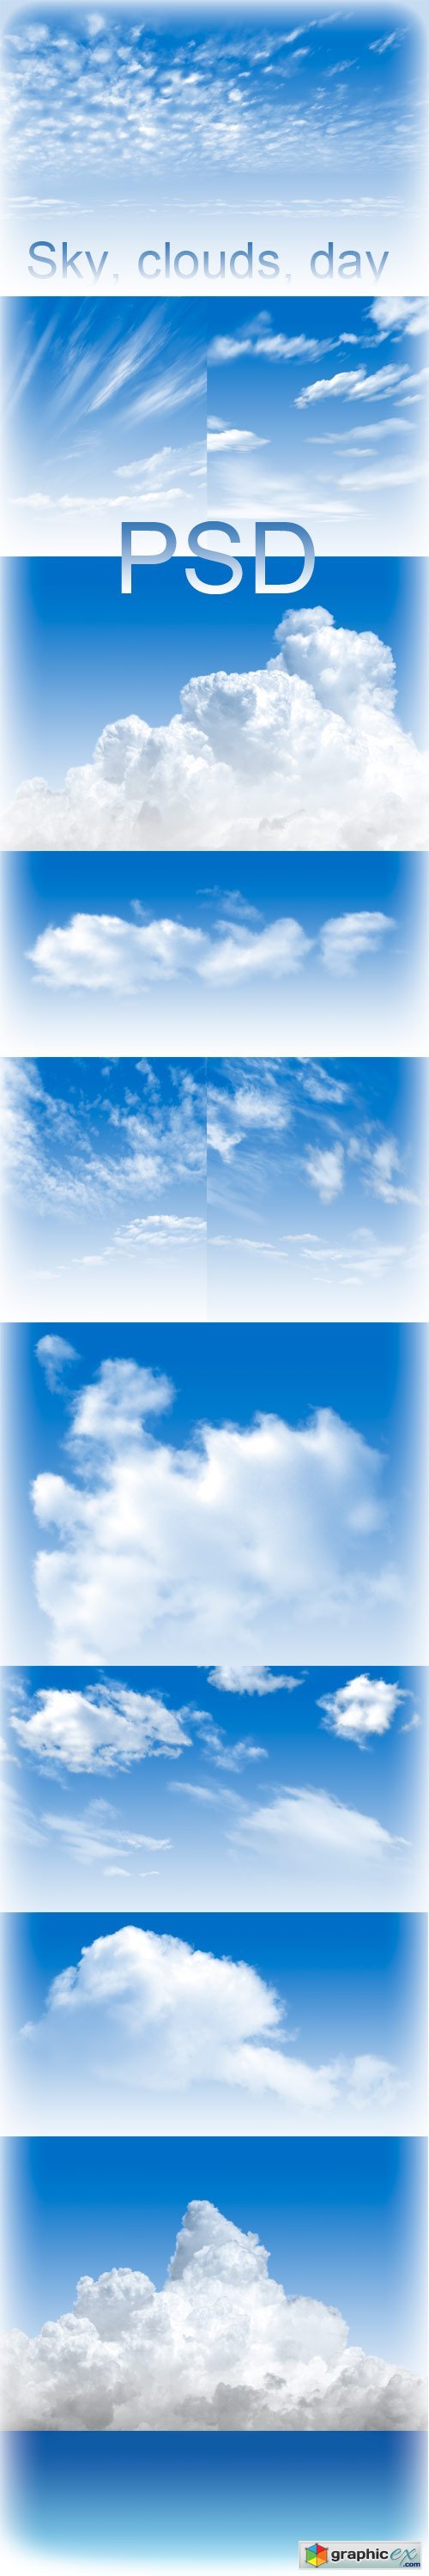 Sky, clouds, day - PSD source